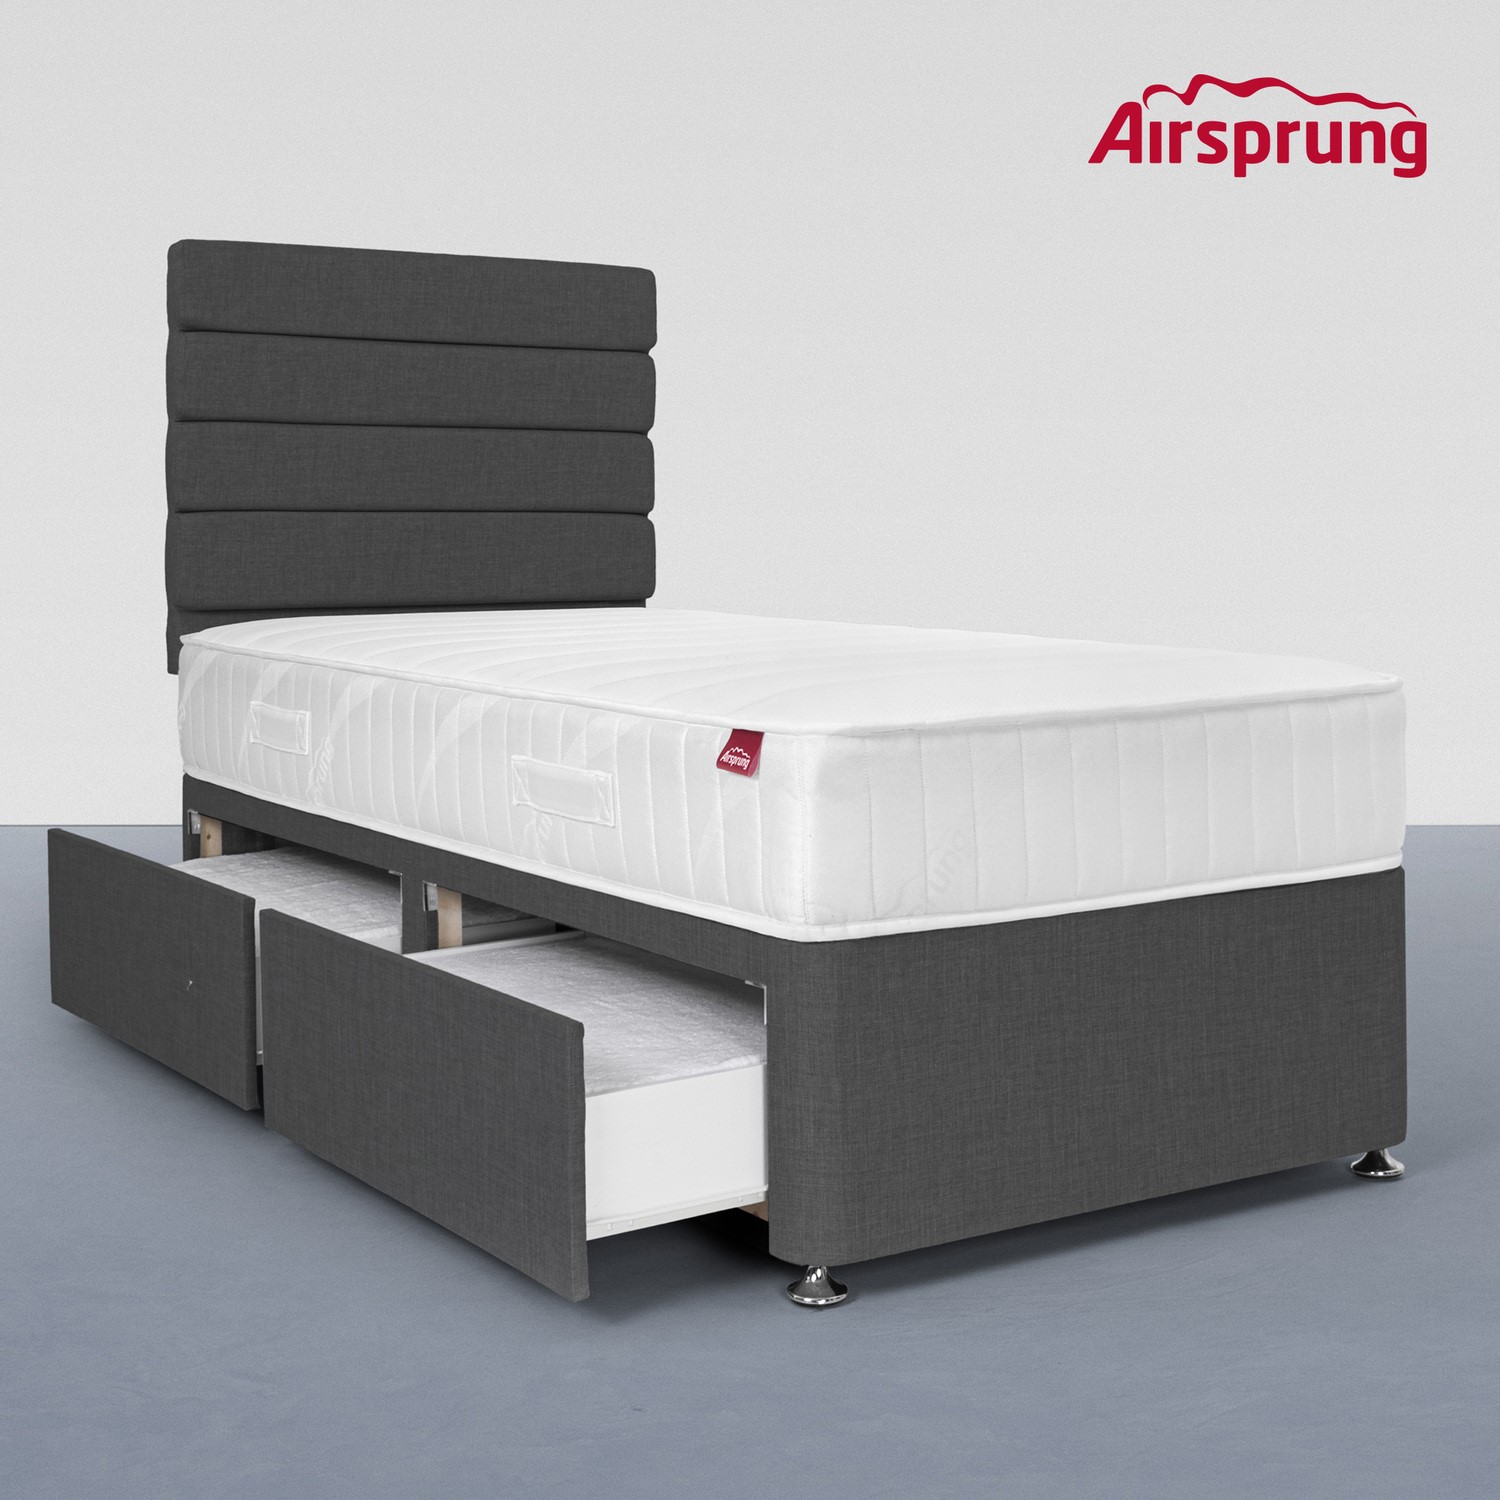 Read more about Airsprung single 2 drawer divan bed with hybrid mattress charcoal